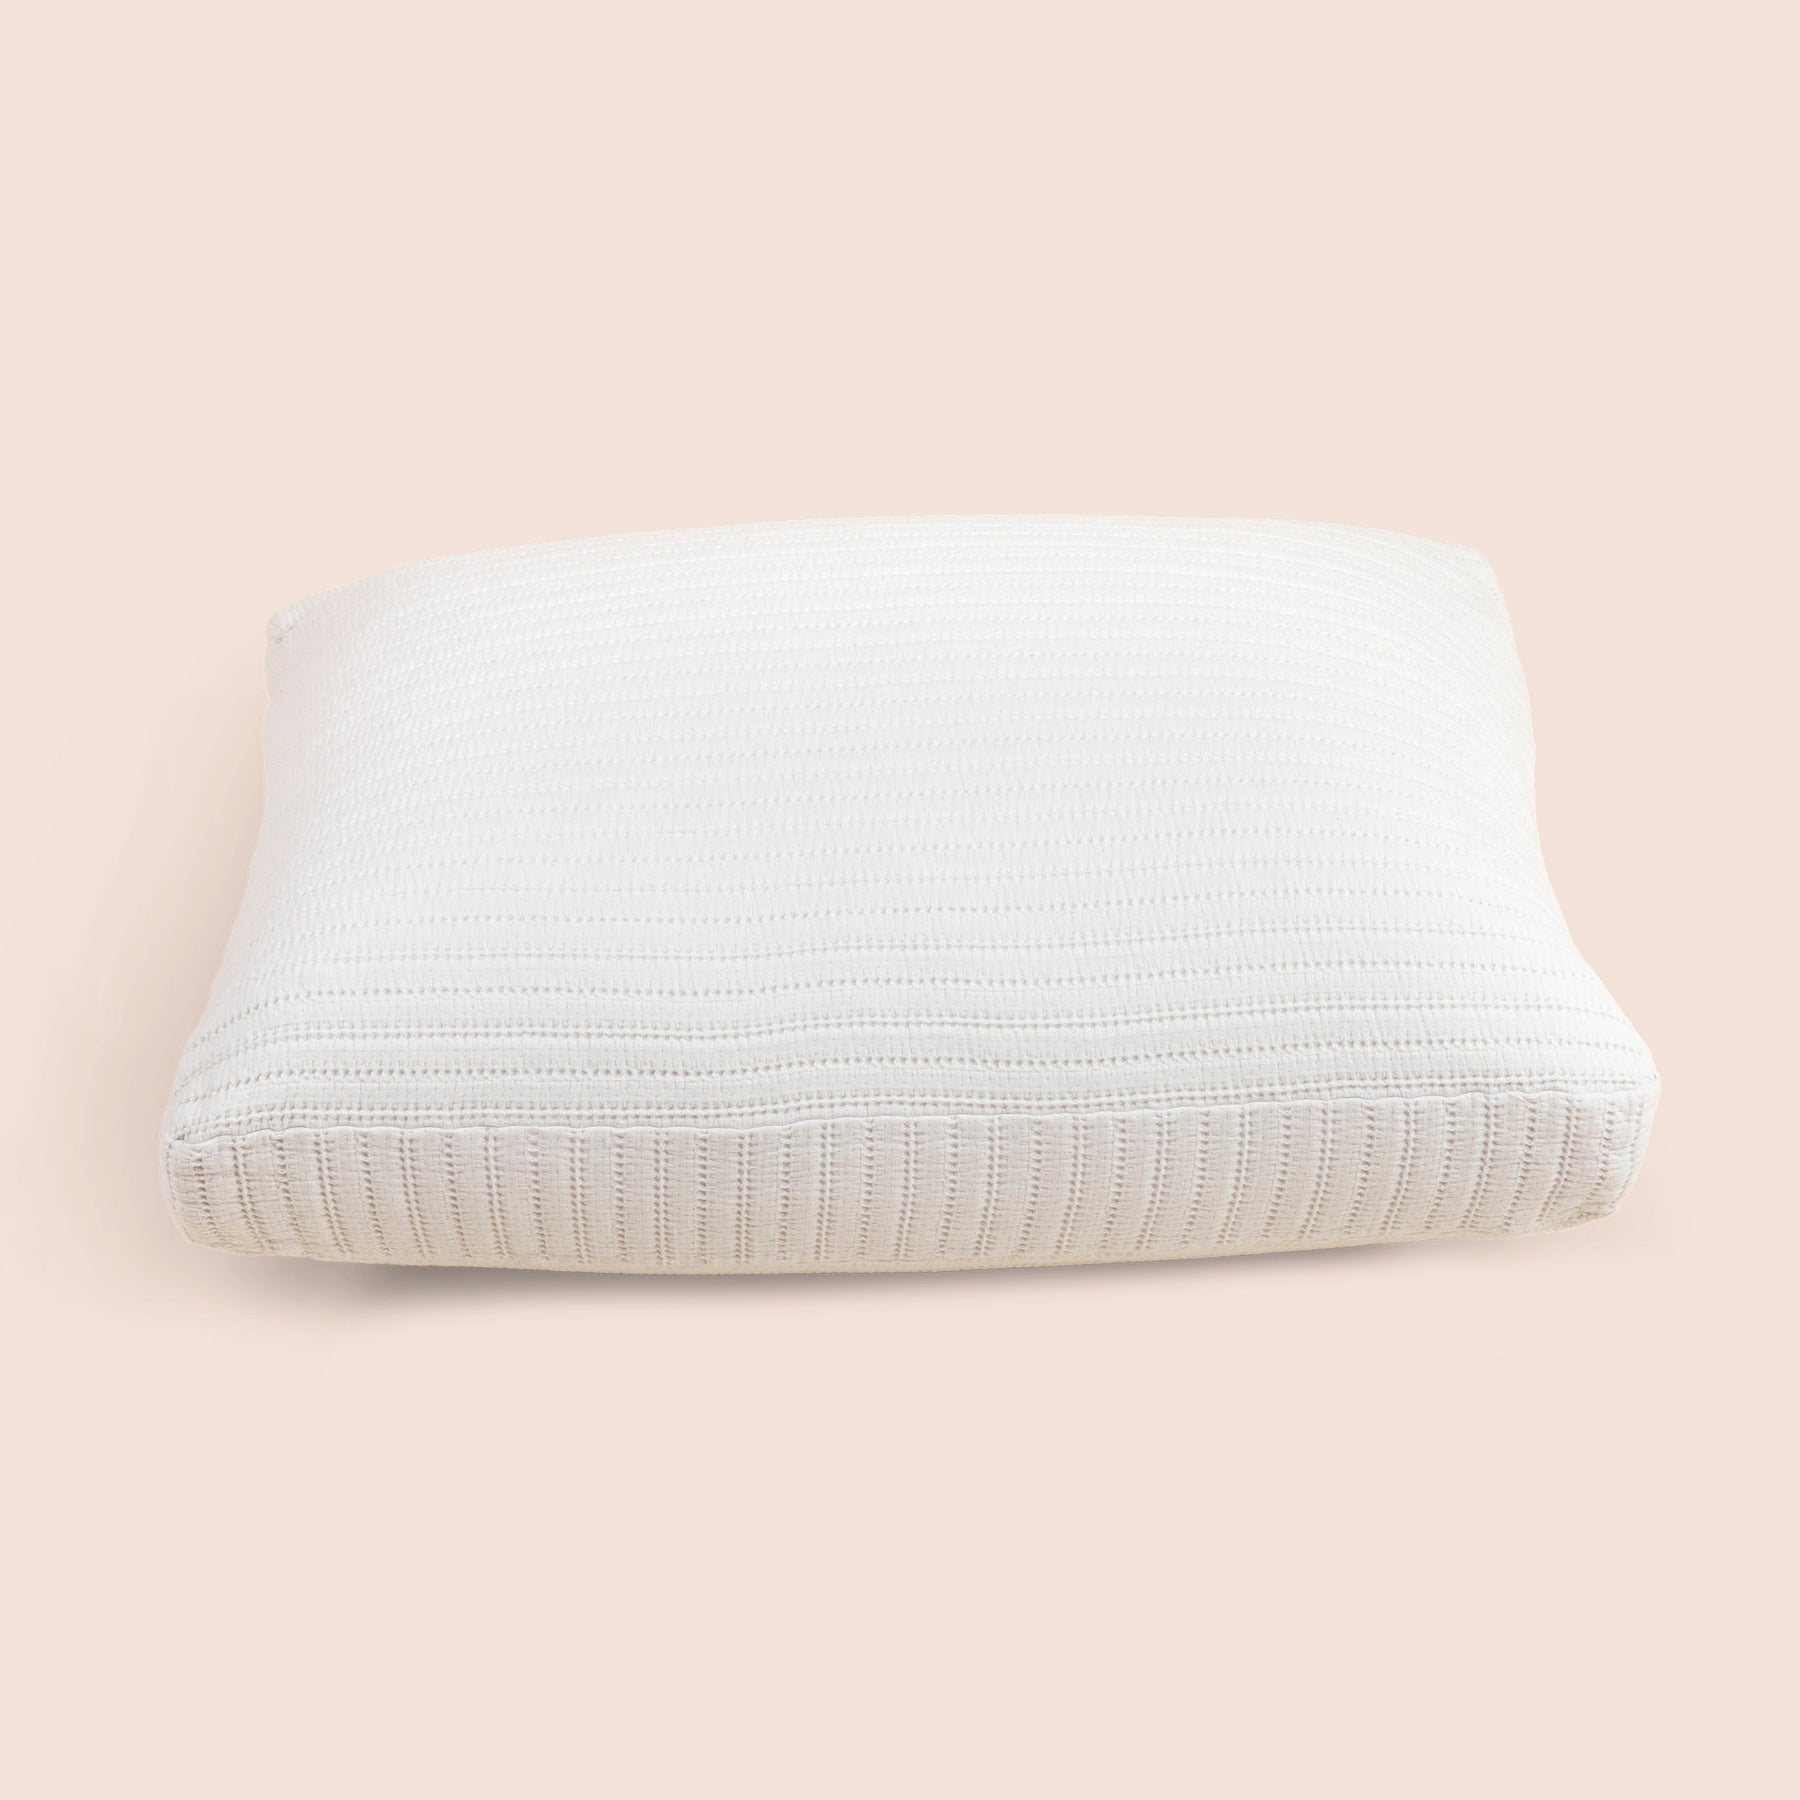 Image of the Ecru Ridgeback Meditation Cushion Cover on a meditation cushion with a light pink background